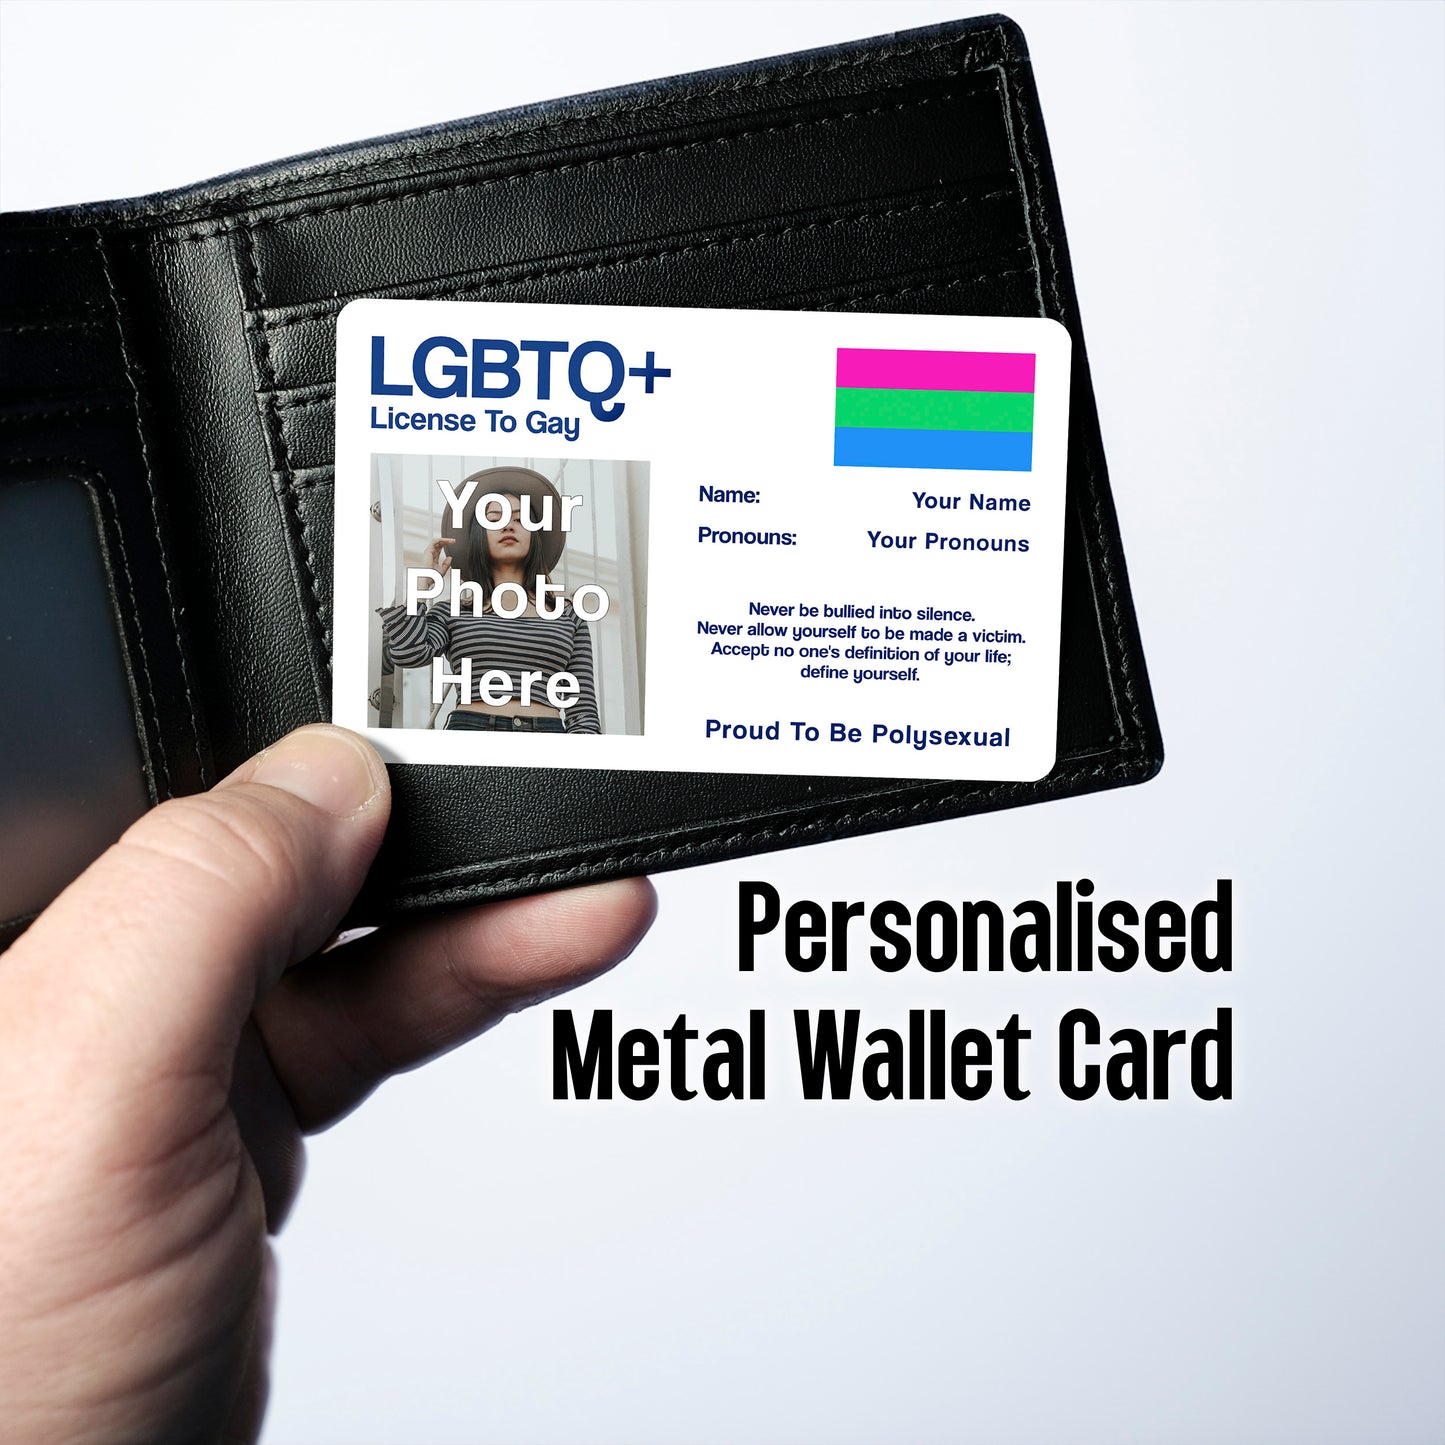 Polysexual license to gay aluminium wallet card personalised with your name, pronouns, and photo